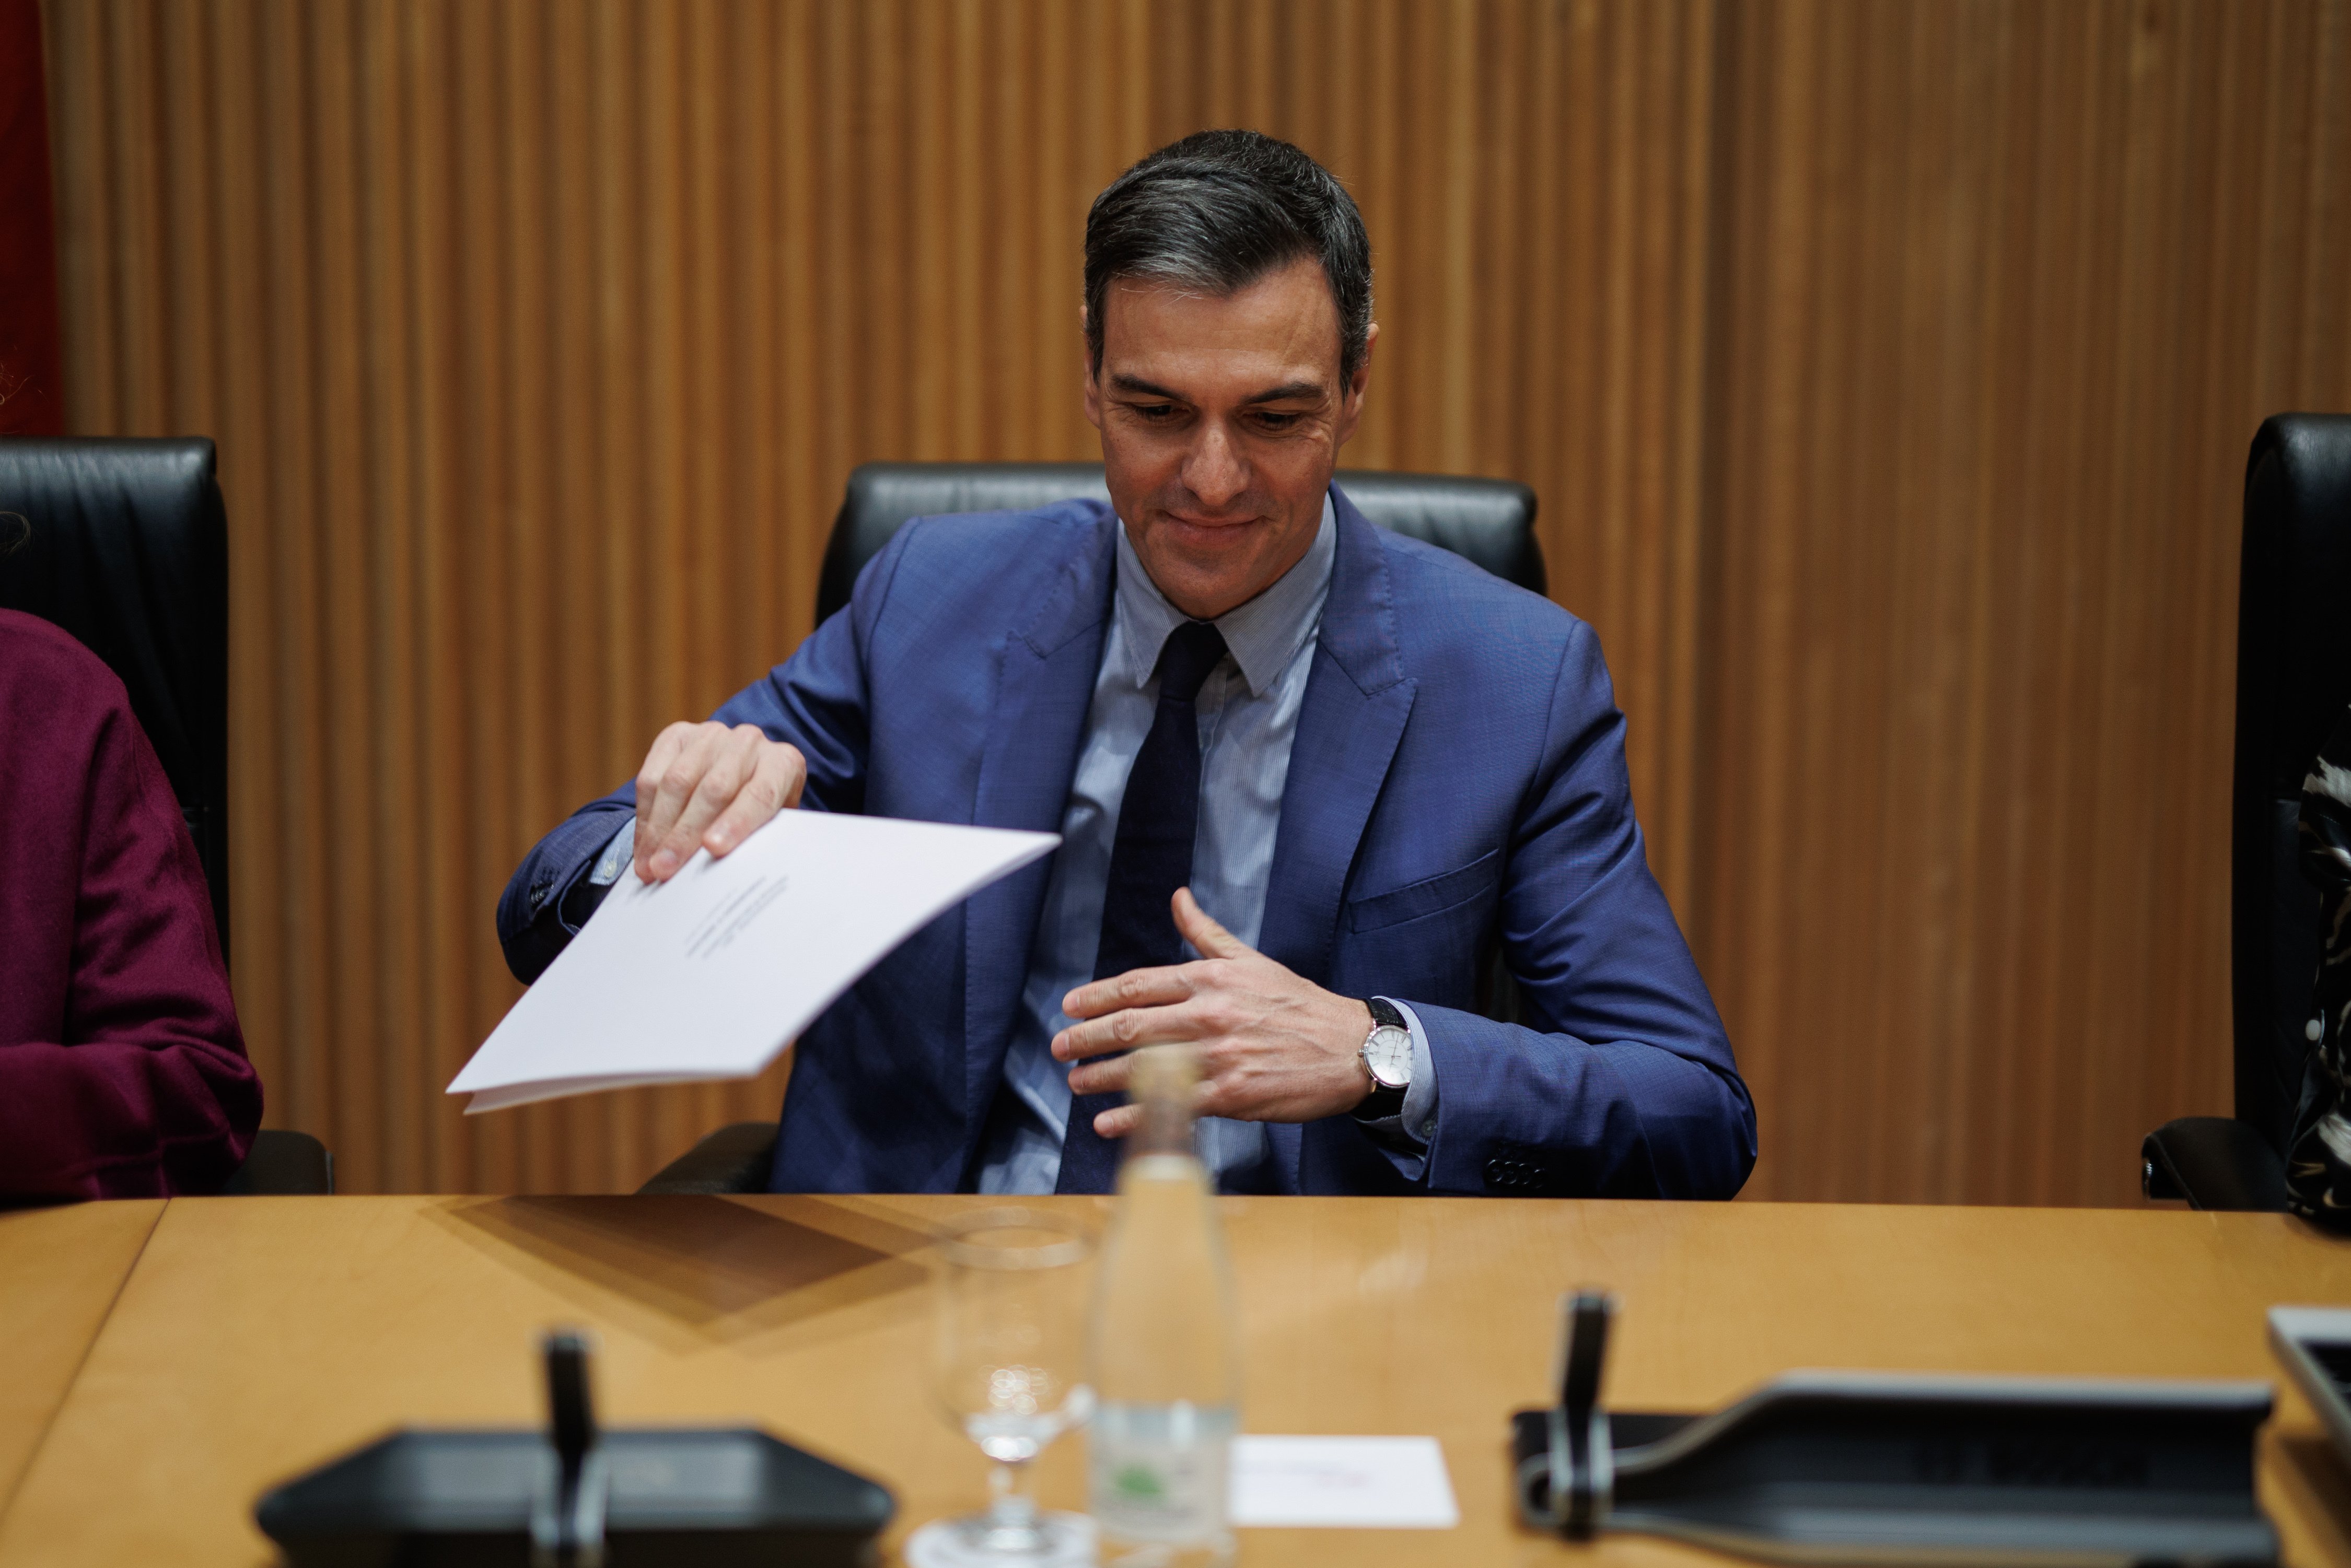 Pedro Sánchez boasts of having "broken the independence movement" during his mandate